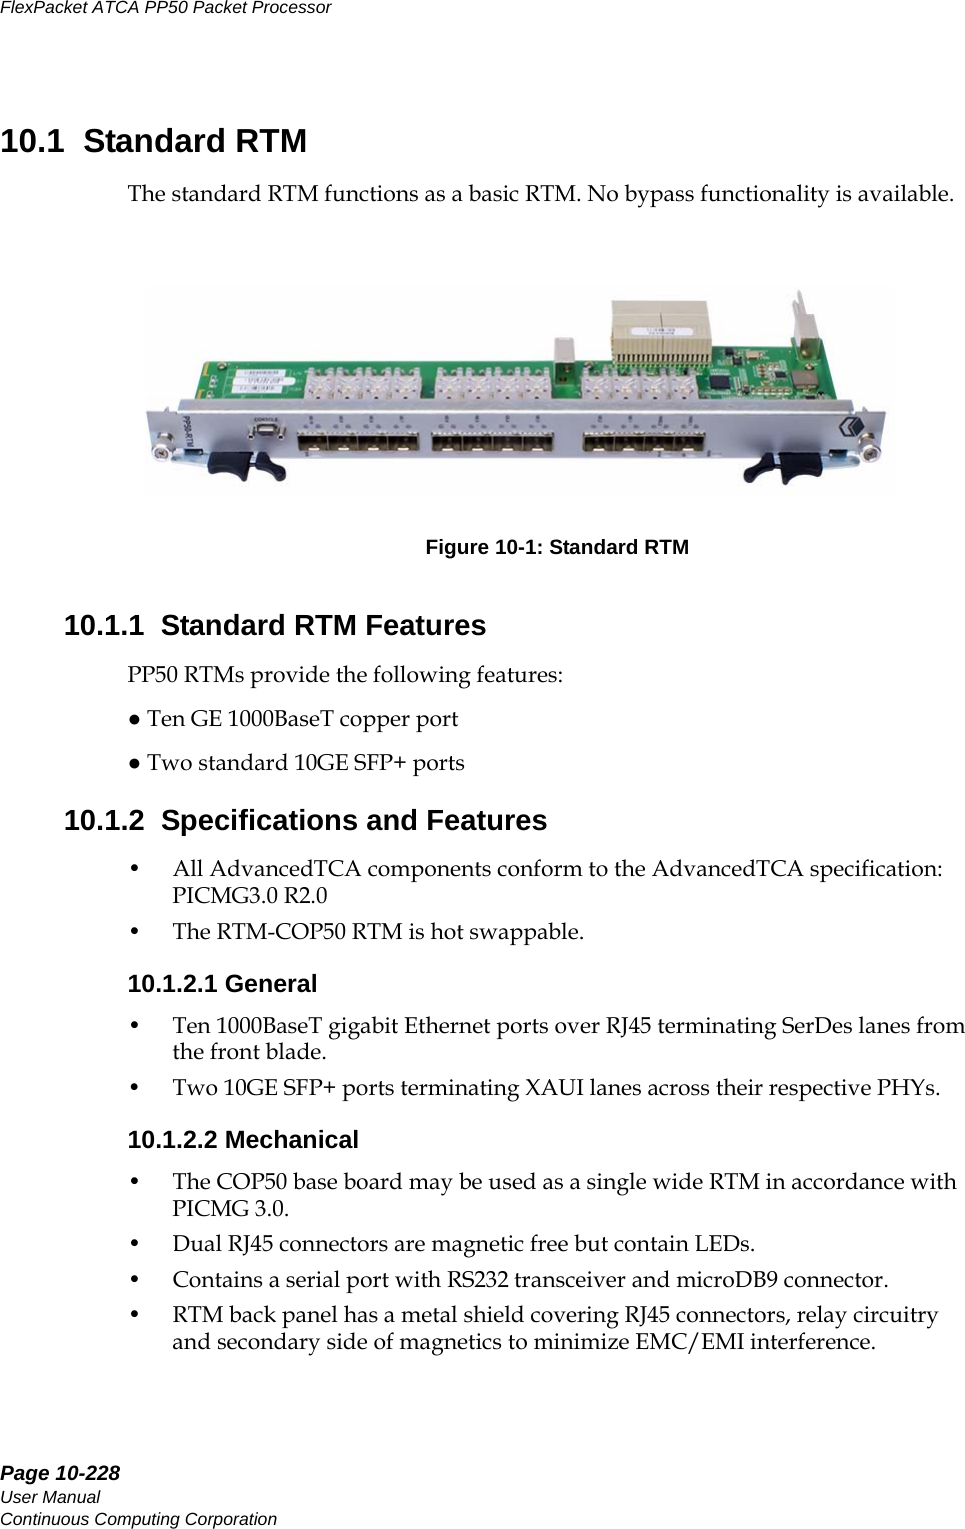 Page 10-228User ManualContinuous Computing CorporationFlexPacket ATCA PP50 Packet Processor     Preliminary10.1  Standard RTMThe standard RTM functions as a basic RTM. No bypass functionality is available.10.1.1  Standard RTM FeaturesPP50 RTMs provide the following features:● Ten GE 1000BaseT copper port● Two standard 10GE SFP+ ports10.1.2  Specifications and Features• All AdvancedTCA components conform to the AdvancedTCA specification: PICMG3.0 R2.0 • The RTM-COP50 RTM is hot swappable.10.1.2.1 General• Ten 1000BaseT gigabit Ethernet ports over RJ45 terminating SerDes lanes from the front blade.• Two 10GE SFP+ ports terminating XAUI lanes across their respective PHYs.10.1.2.2 Mechanical• The COP50 base board may be used as a single wide RTM in accordance with PICMG 3.0.• Dual RJ45 connectors are magnetic free but contain LEDs. • Contains a serial port with RS232 transceiver and microDB9 connector.• RTM back panel has a metal shield covering RJ45 connectors, relay circuitry and secondary side of magnetics to minimize EMC/EMI interference.Figure 10-1: Standard RTM